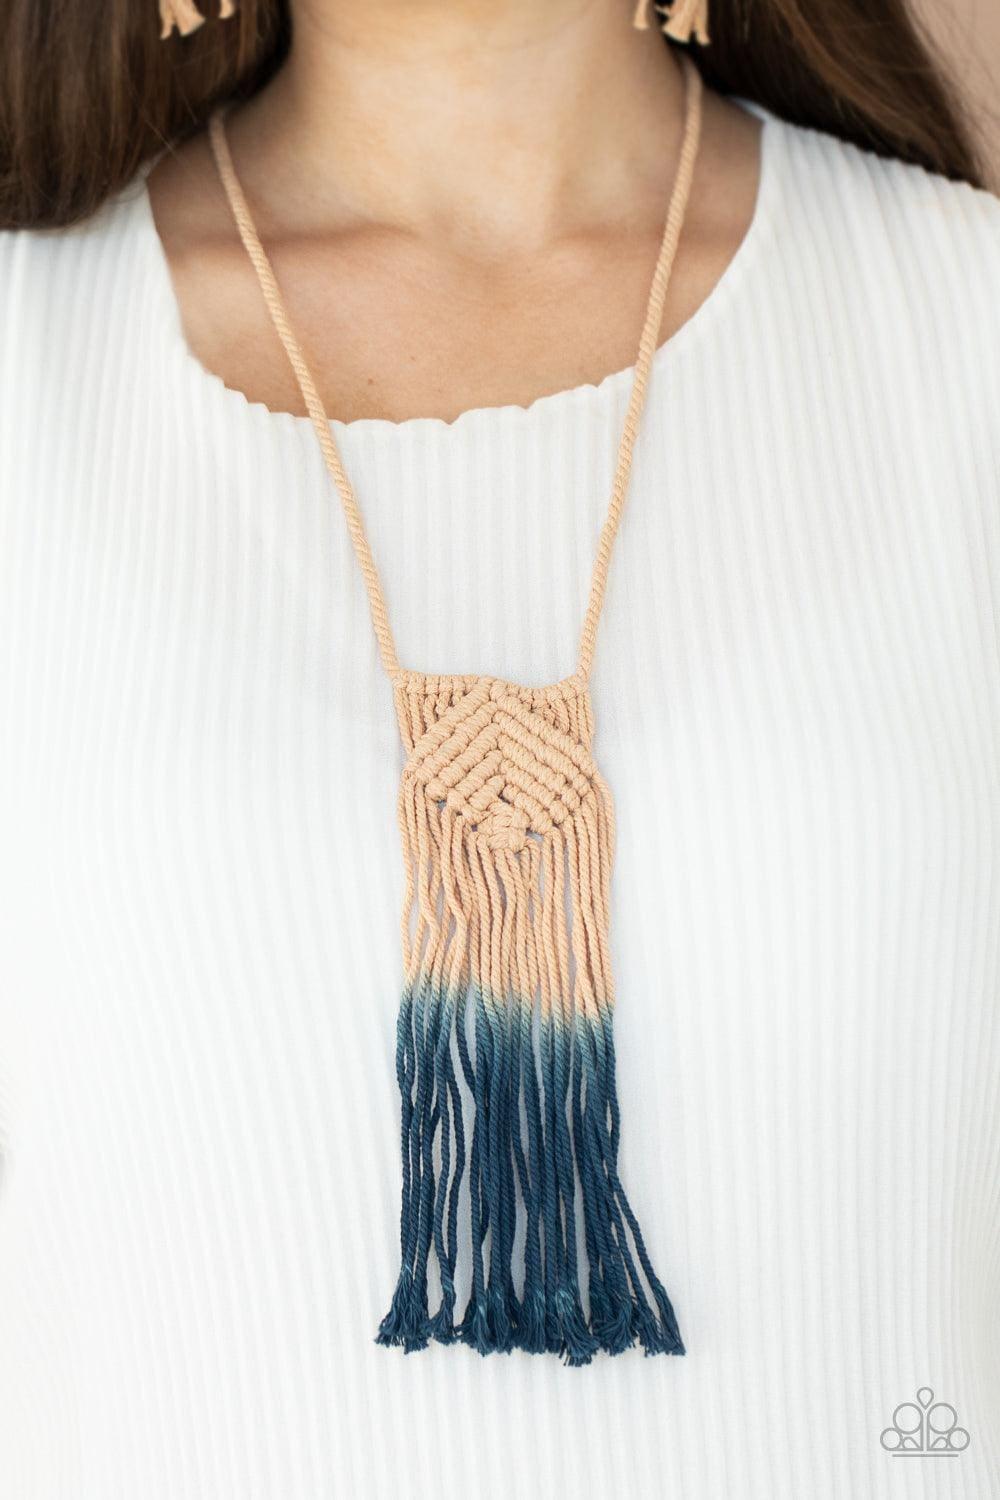 Paparazzi Accessories - Look At Macrame Now - Blue Necklace - Bling by JessieK